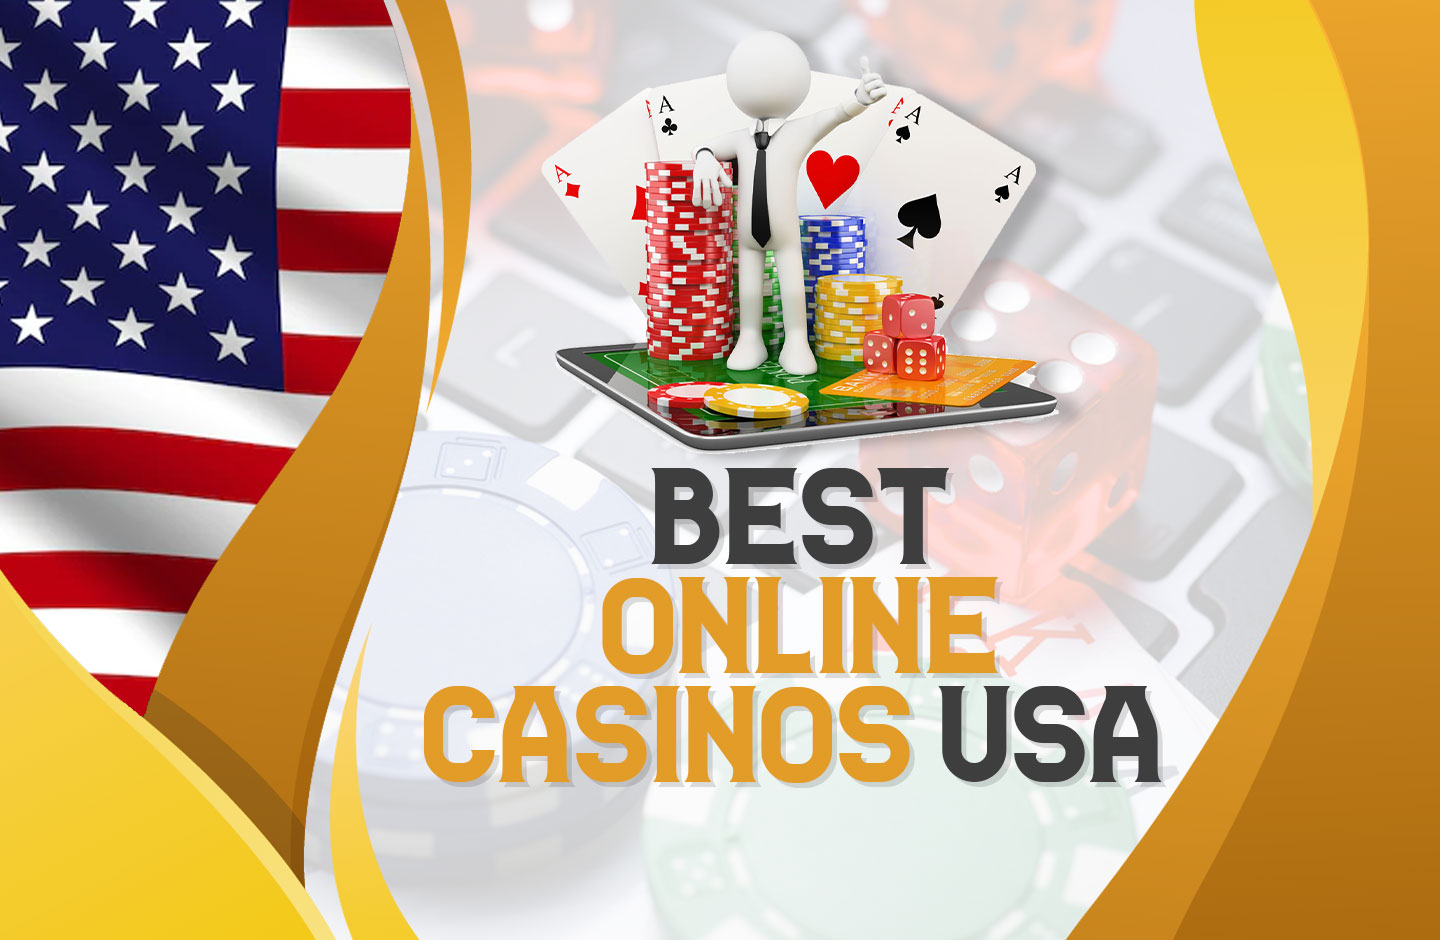 Now You Can Buy An App That is Really Made For online casino games